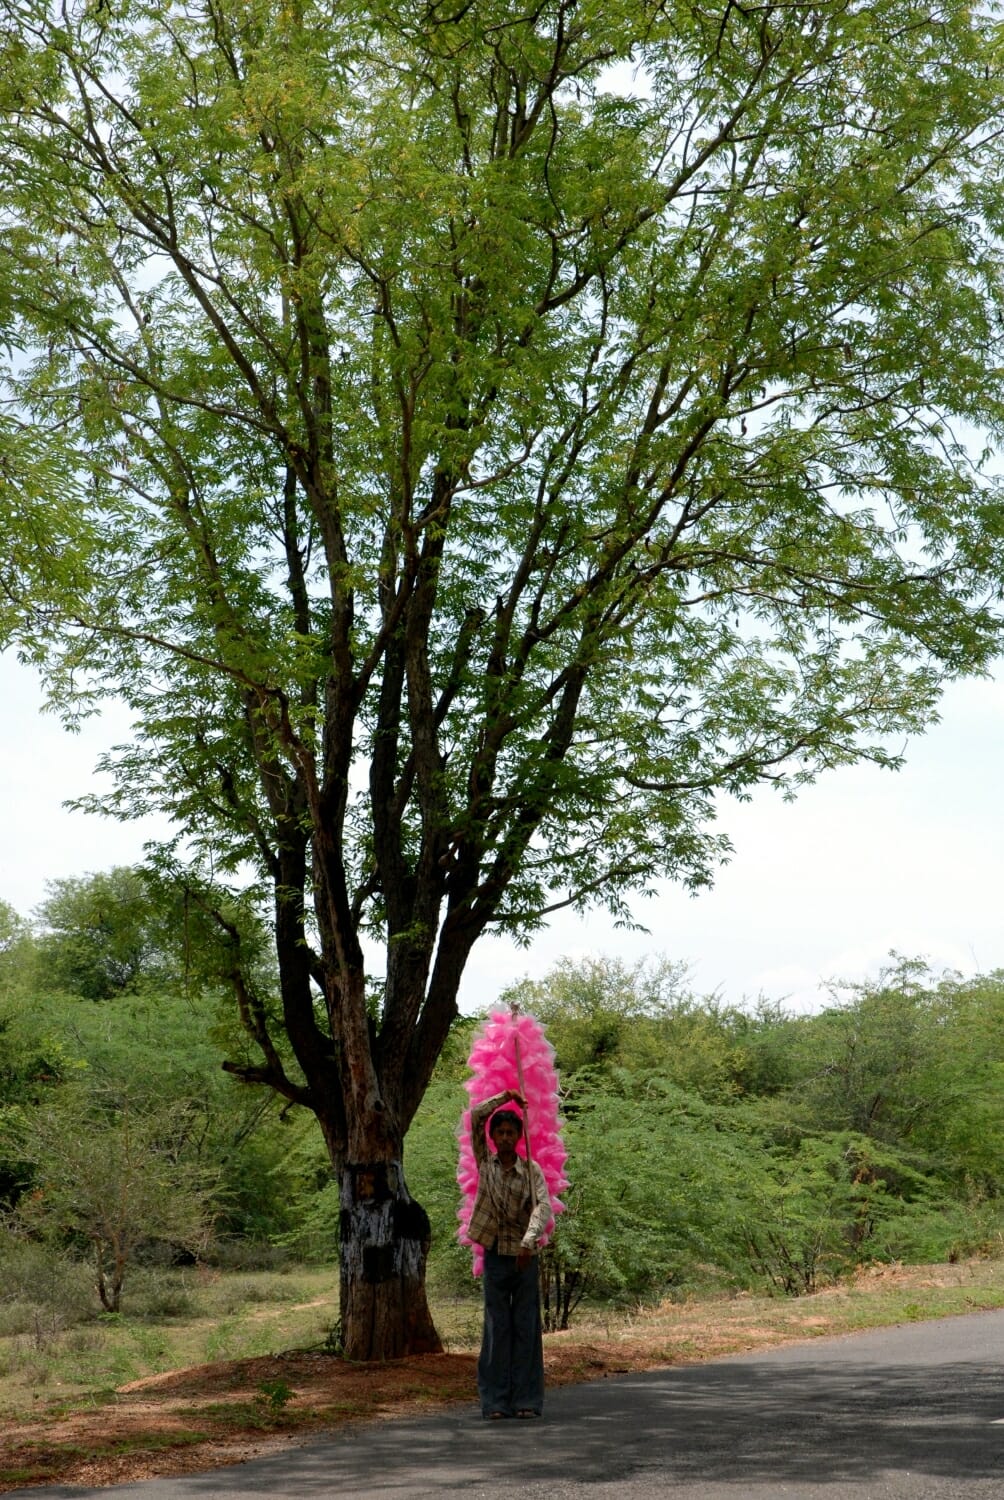 <span style="font-weight:normal;">Cotton Candy Seller, Tamil Nadu, 2010</span>